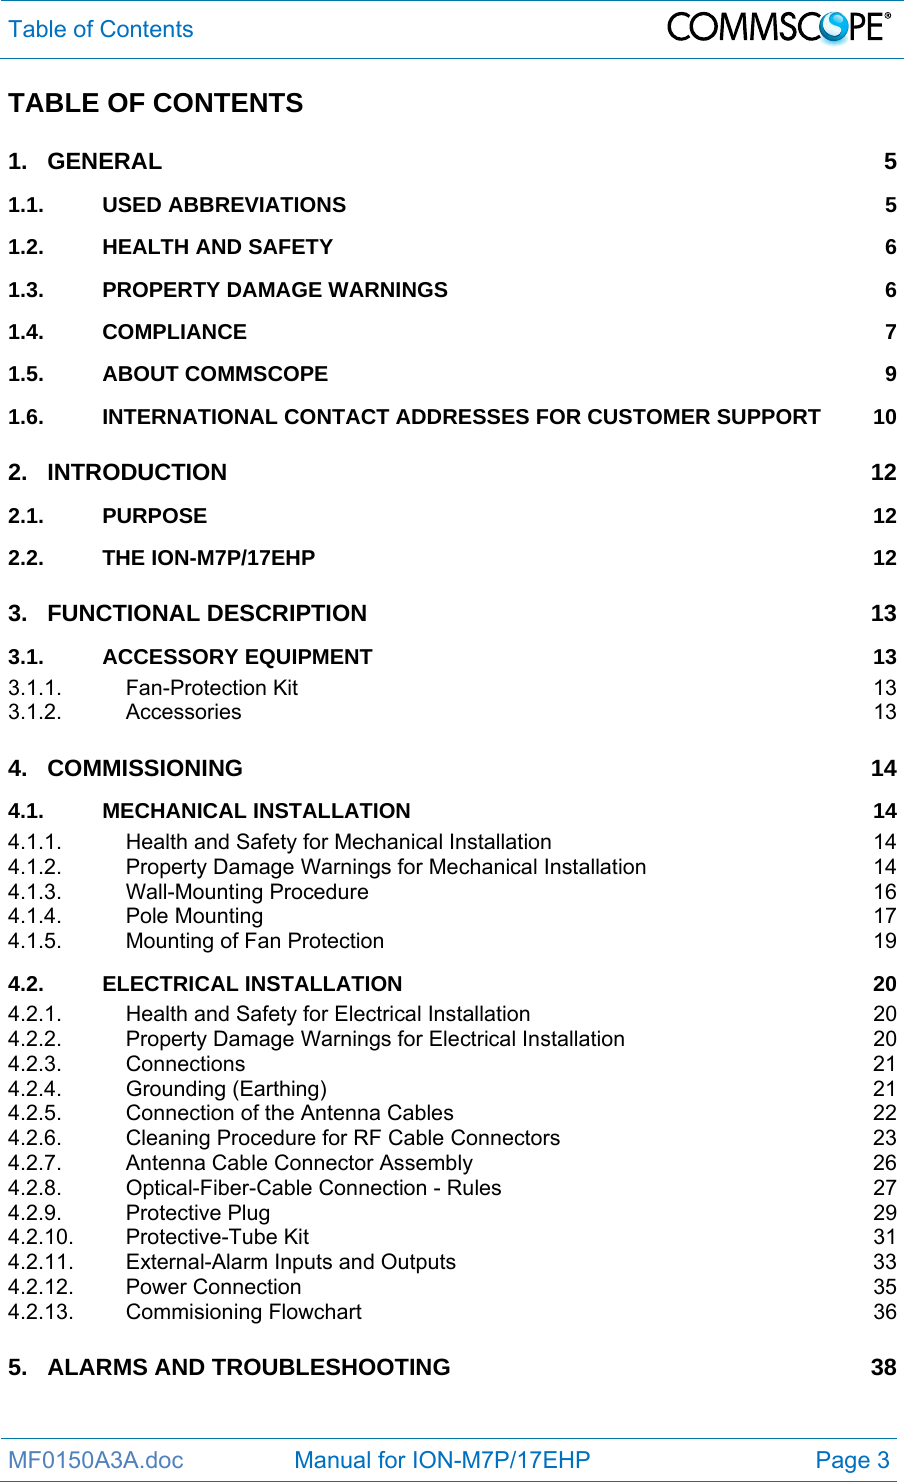 Table of Contents  MF0150A3A.doc                 Manual for ION-M7P/17EHP  Page 3 TABLE OF CONTENTS 1.GENERAL 51.1.USED ABBREVIATIONS  51.2.HEALTH AND SAFETY  61.3.PROPERTY DAMAGE WARNINGS  61.4.COMPLIANCE 71.5.ABOUT COMMSCOPE  91.6.INTERNATIONAL CONTACT ADDRESSES FOR CUSTOMER SUPPORT  102.INTRODUCTION 122.1.PURPOSE 122.2.THE ION-M7P/17EHP  123.FUNCTIONAL DESCRIPTION  133.1.ACCESSORY EQUIPMENT  133.1.1.Fan-Protection Kit  133.1.2.Accessories 134.COMMISSIONING 144.1.MECHANICAL INSTALLATION  144.1.1.Health and Safety for Mechanical Installation  144.1.2.Property Damage Warnings for Mechanical Installation  144.1.3.Wall-Mounting Procedure  164.1.4.Pole Mounting  174.1.5.Mounting of Fan Protection  194.2.ELECTRICAL INSTALLATION  204.2.1.Health and Safety for Electrical Installation  204.2.2.Property Damage Warnings for Electrical Installation  204.2.3.Connections 214.2.4.Grounding (Earthing)  214.2.5.Connection of the Antenna Cables  224.2.6.Cleaning Procedure for RF Cable Connectors  234.2.7.Antenna Cable Connector Assembly  264.2.8.Optical-Fiber-Cable Connection - Rules  274.2.9.Protective Plug  294.2.10.Protective-Tube Kit  314.2.11.External-Alarm Inputs and Outputs  334.2.12.Power Connection  354.2.13.Commisioning Flowchart  365.ALARMS AND TROUBLESHOOTING  38 